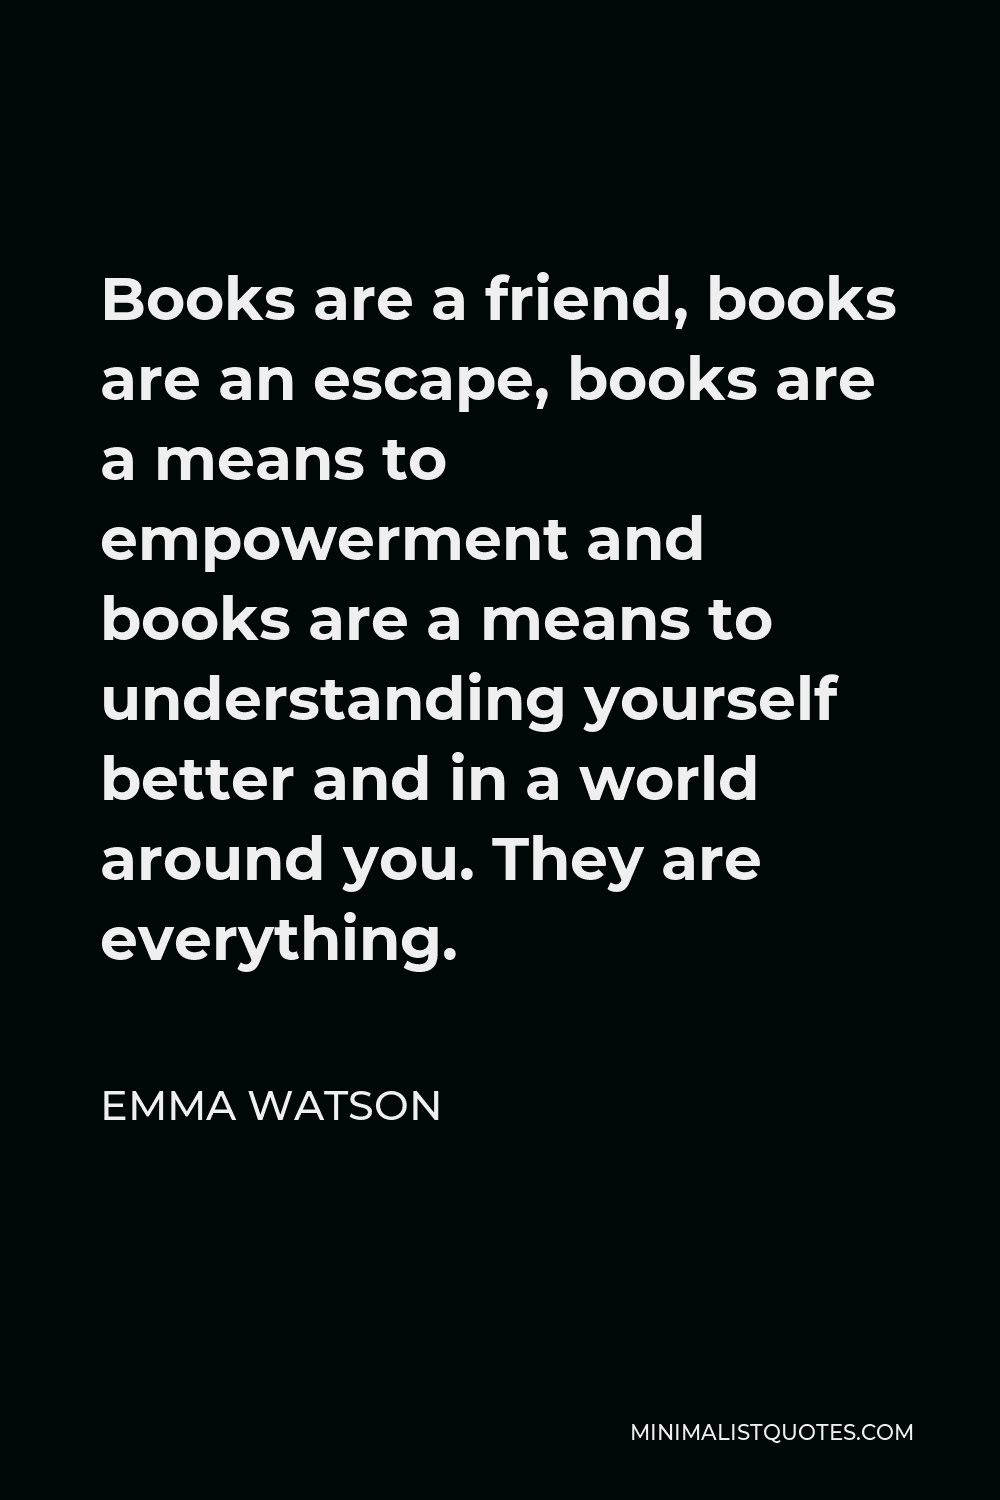 Emma Watson Quote - Books are a friend, books are an escape, books are a means to empowerment and books are a means to understanding yourself better and in a world around you. They are everything.